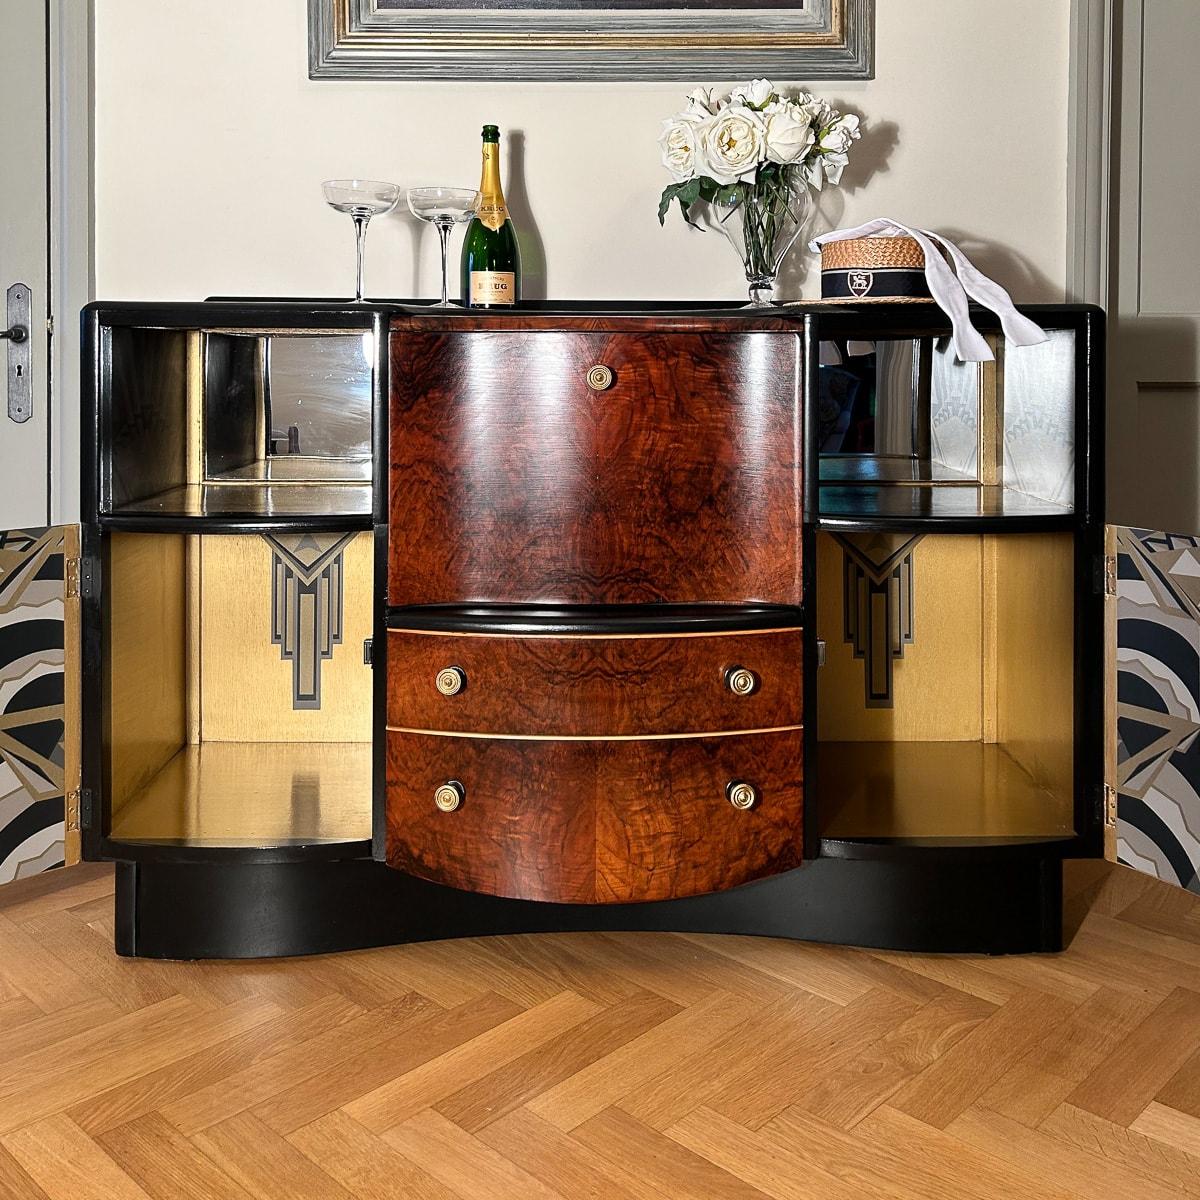 This substantial solid wood cocktail cabinet, crafted by an iconic British furniture maker, embodies the design aesthetics of the 1950s while exuding the distinctive style of the Art Deco period. Its curvaceous and glamorous silhouette is